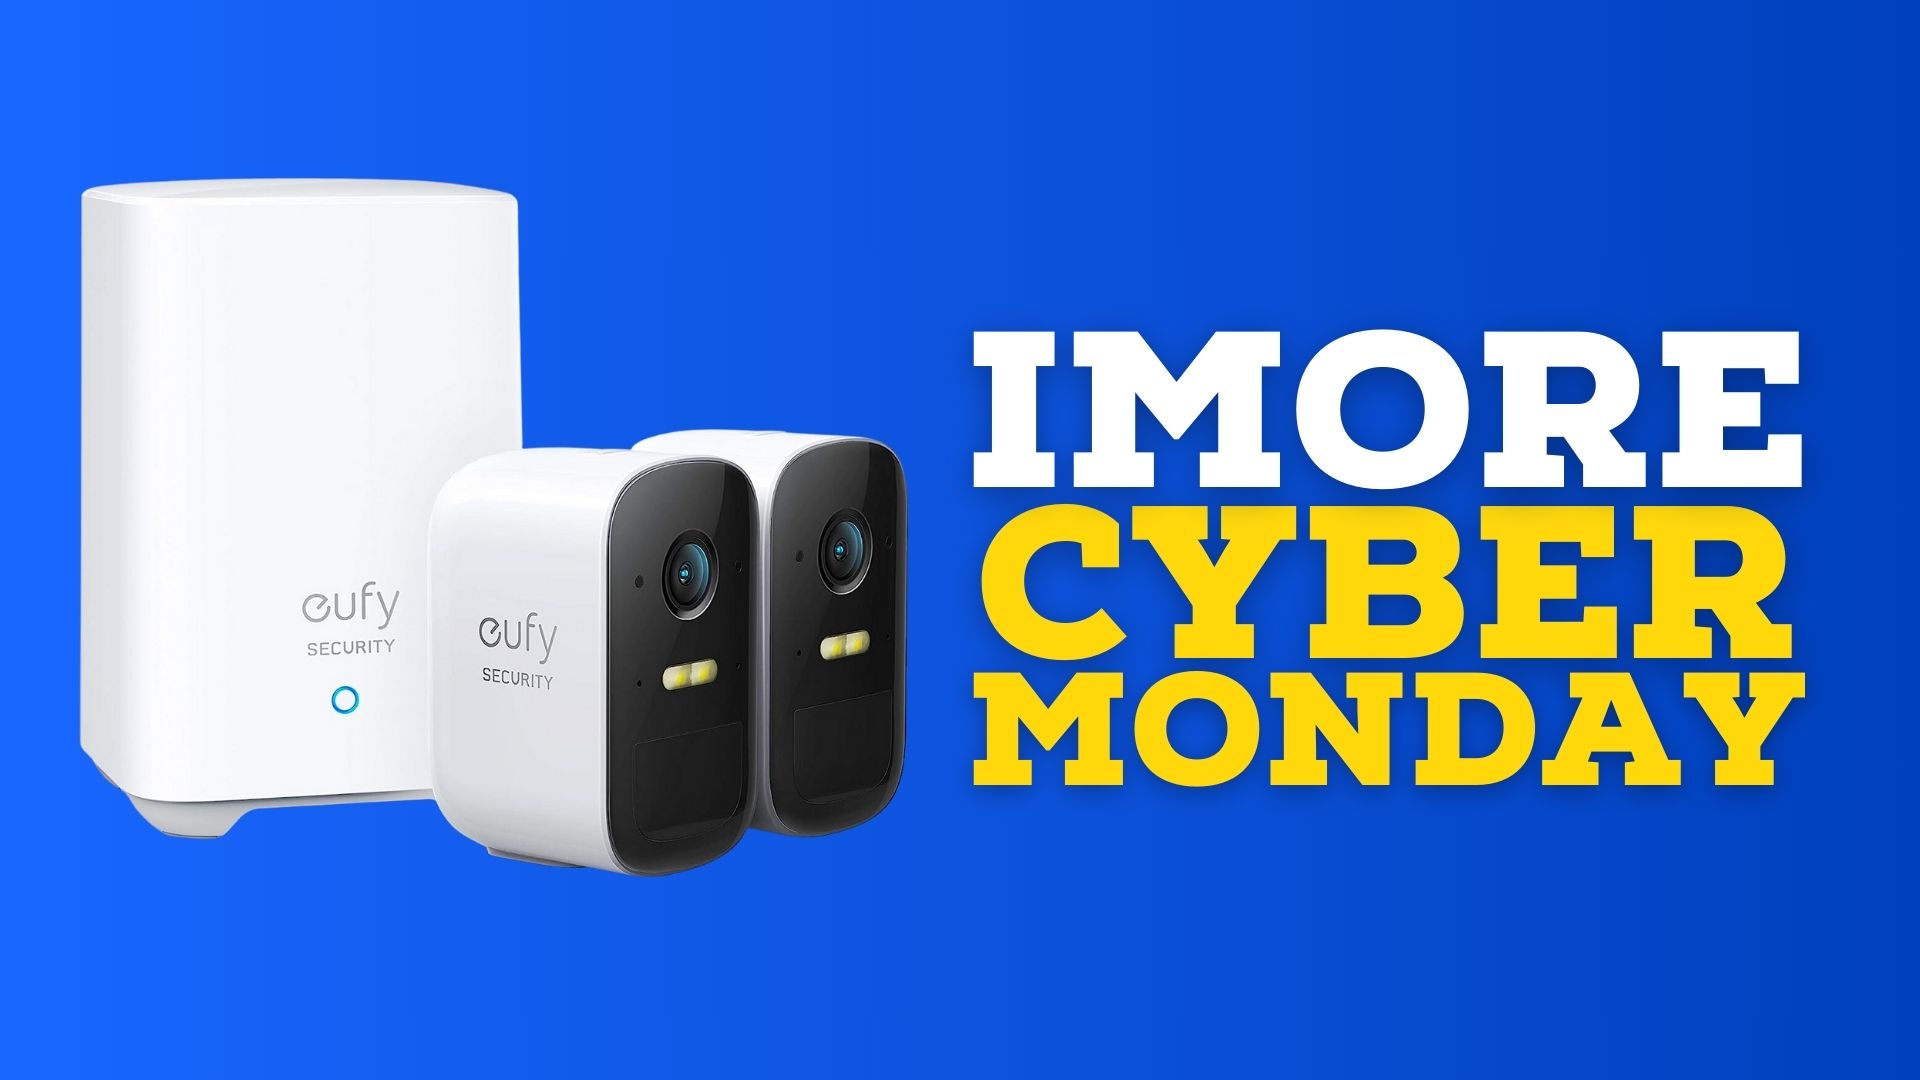 Protect your home with this HomeKit camera deal — save $110 for peace of mind this Cyber Monday